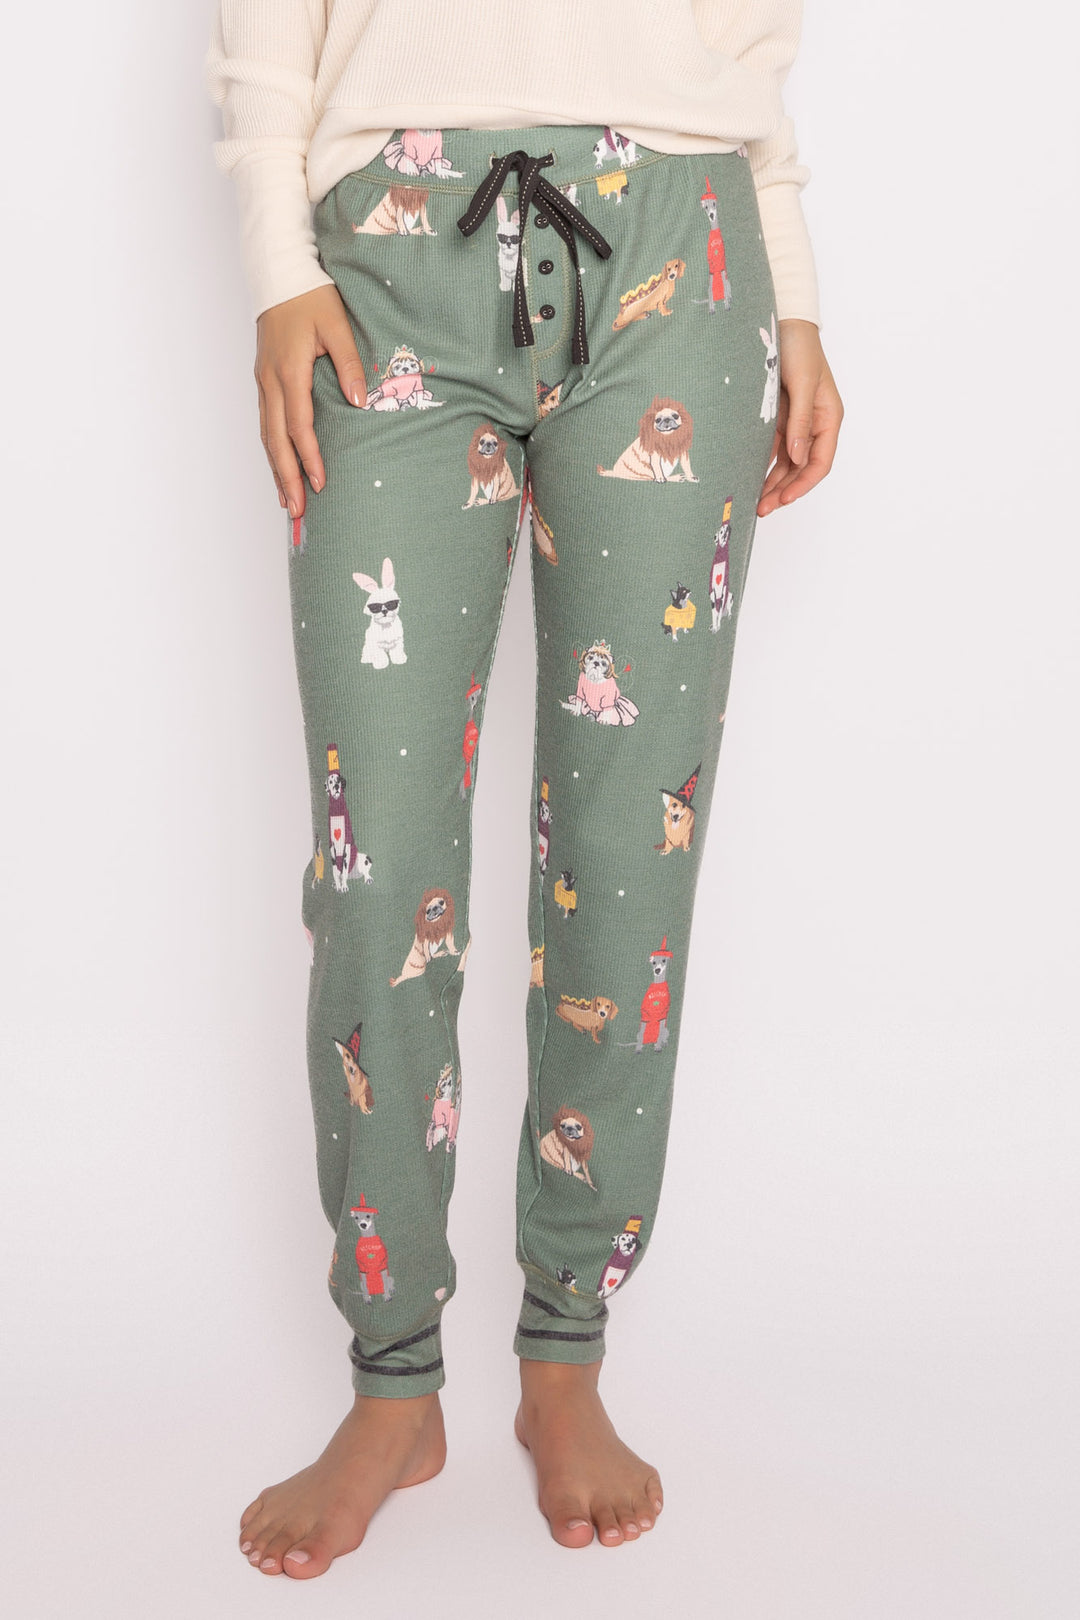 Olive brushed thermal pajama pant, printed with fun multi-breed dogs in costumes. Banded cuffs. (7231867191396)